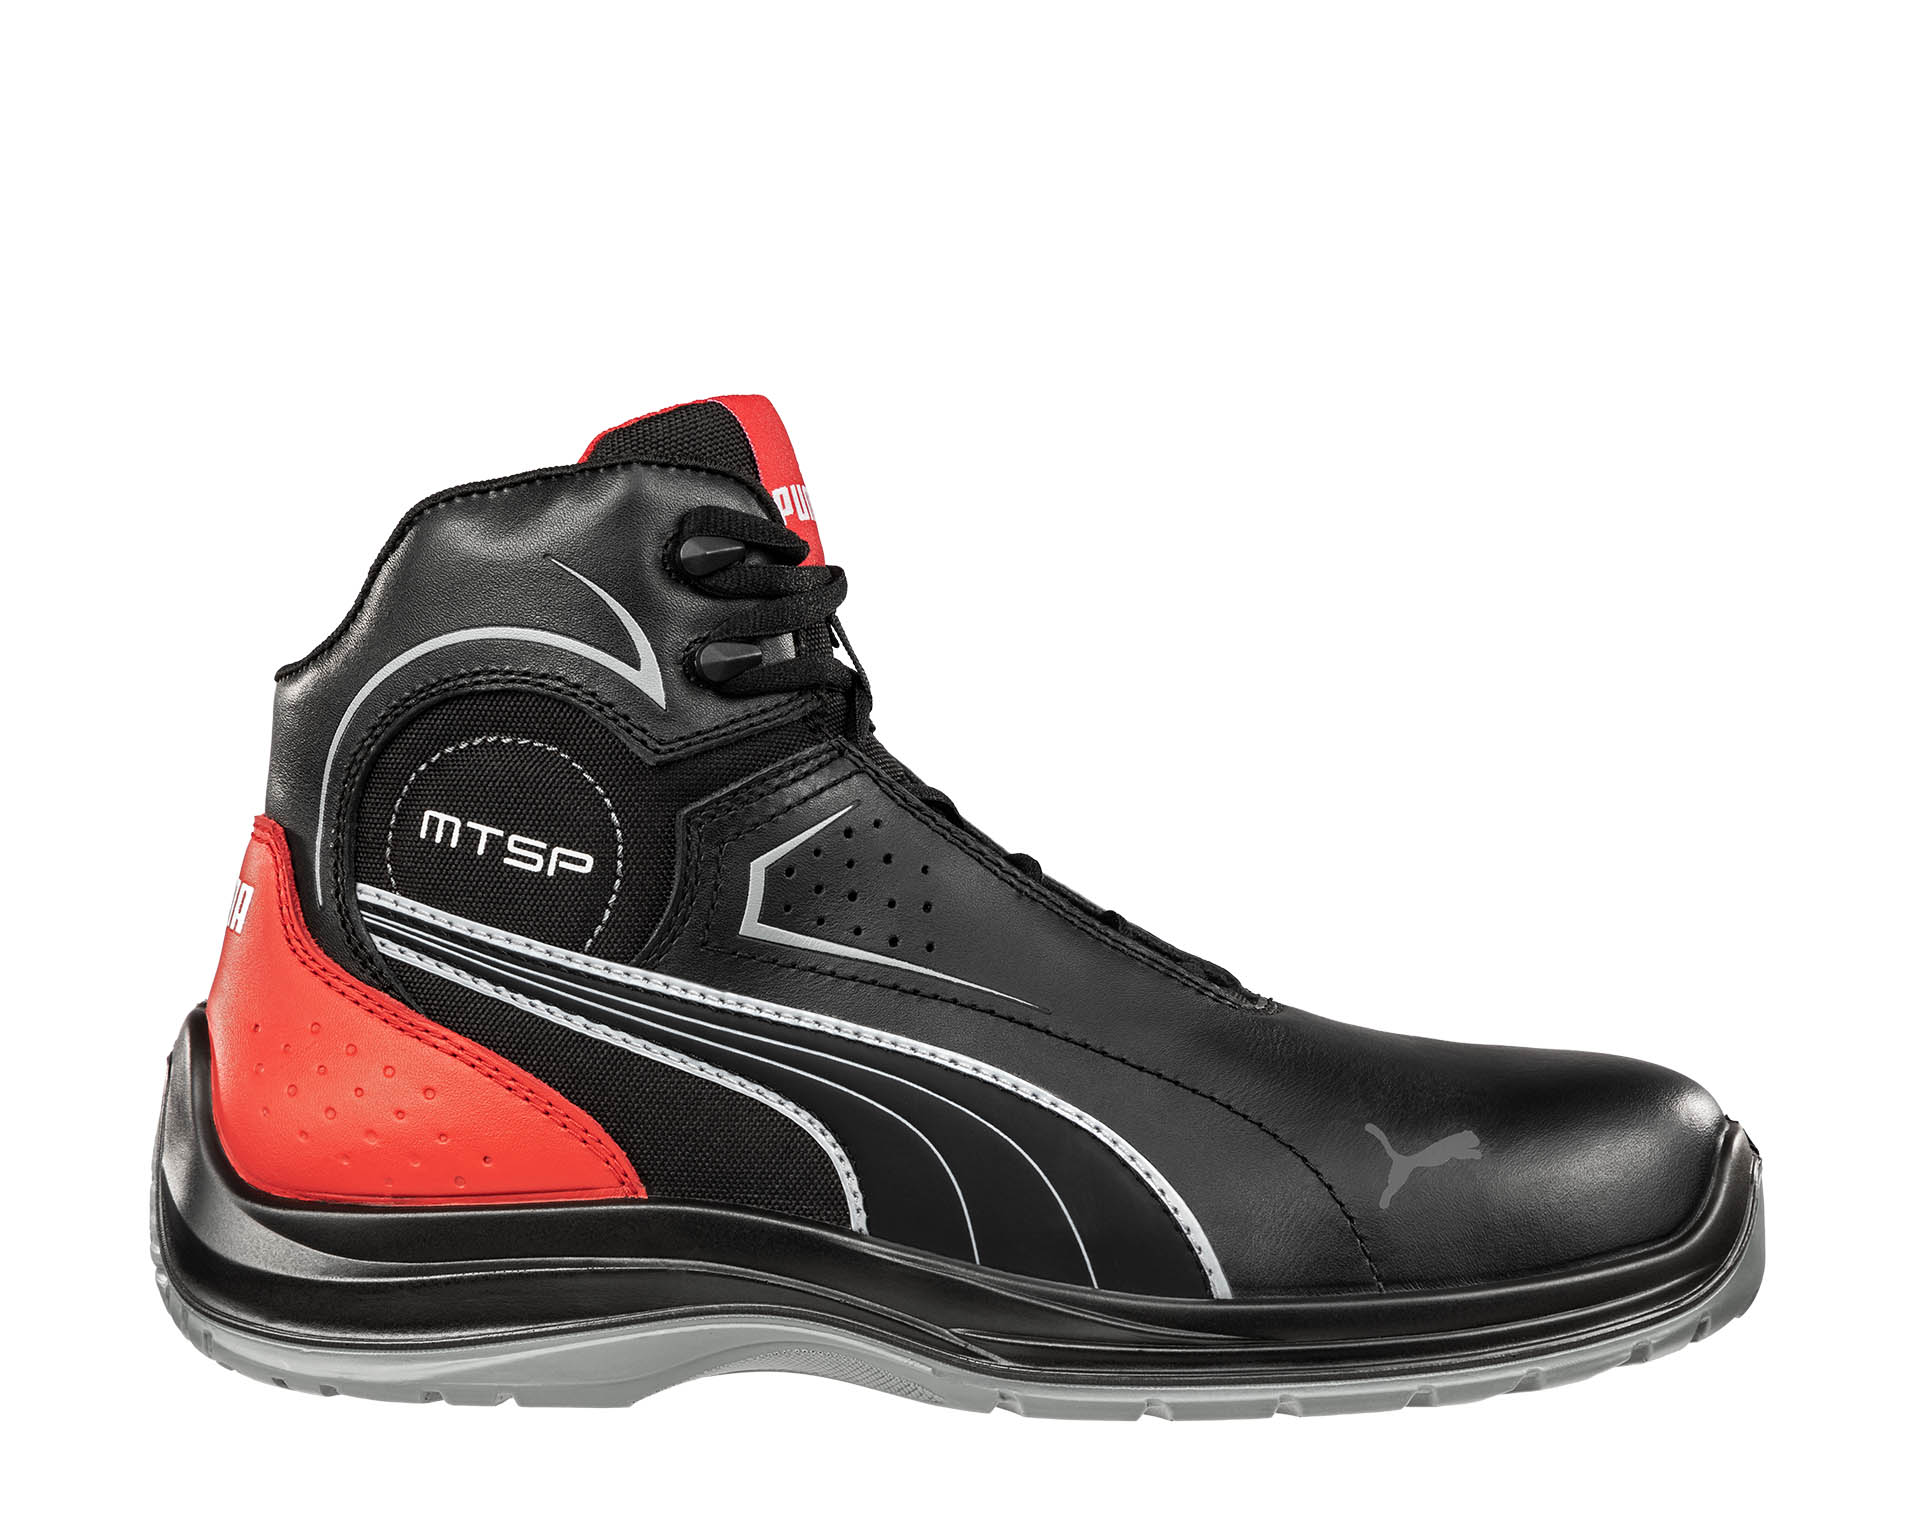 TOURING BLACK MID|PUMA SAFETY work USA Safety ASTM SR shoes EH | Puma